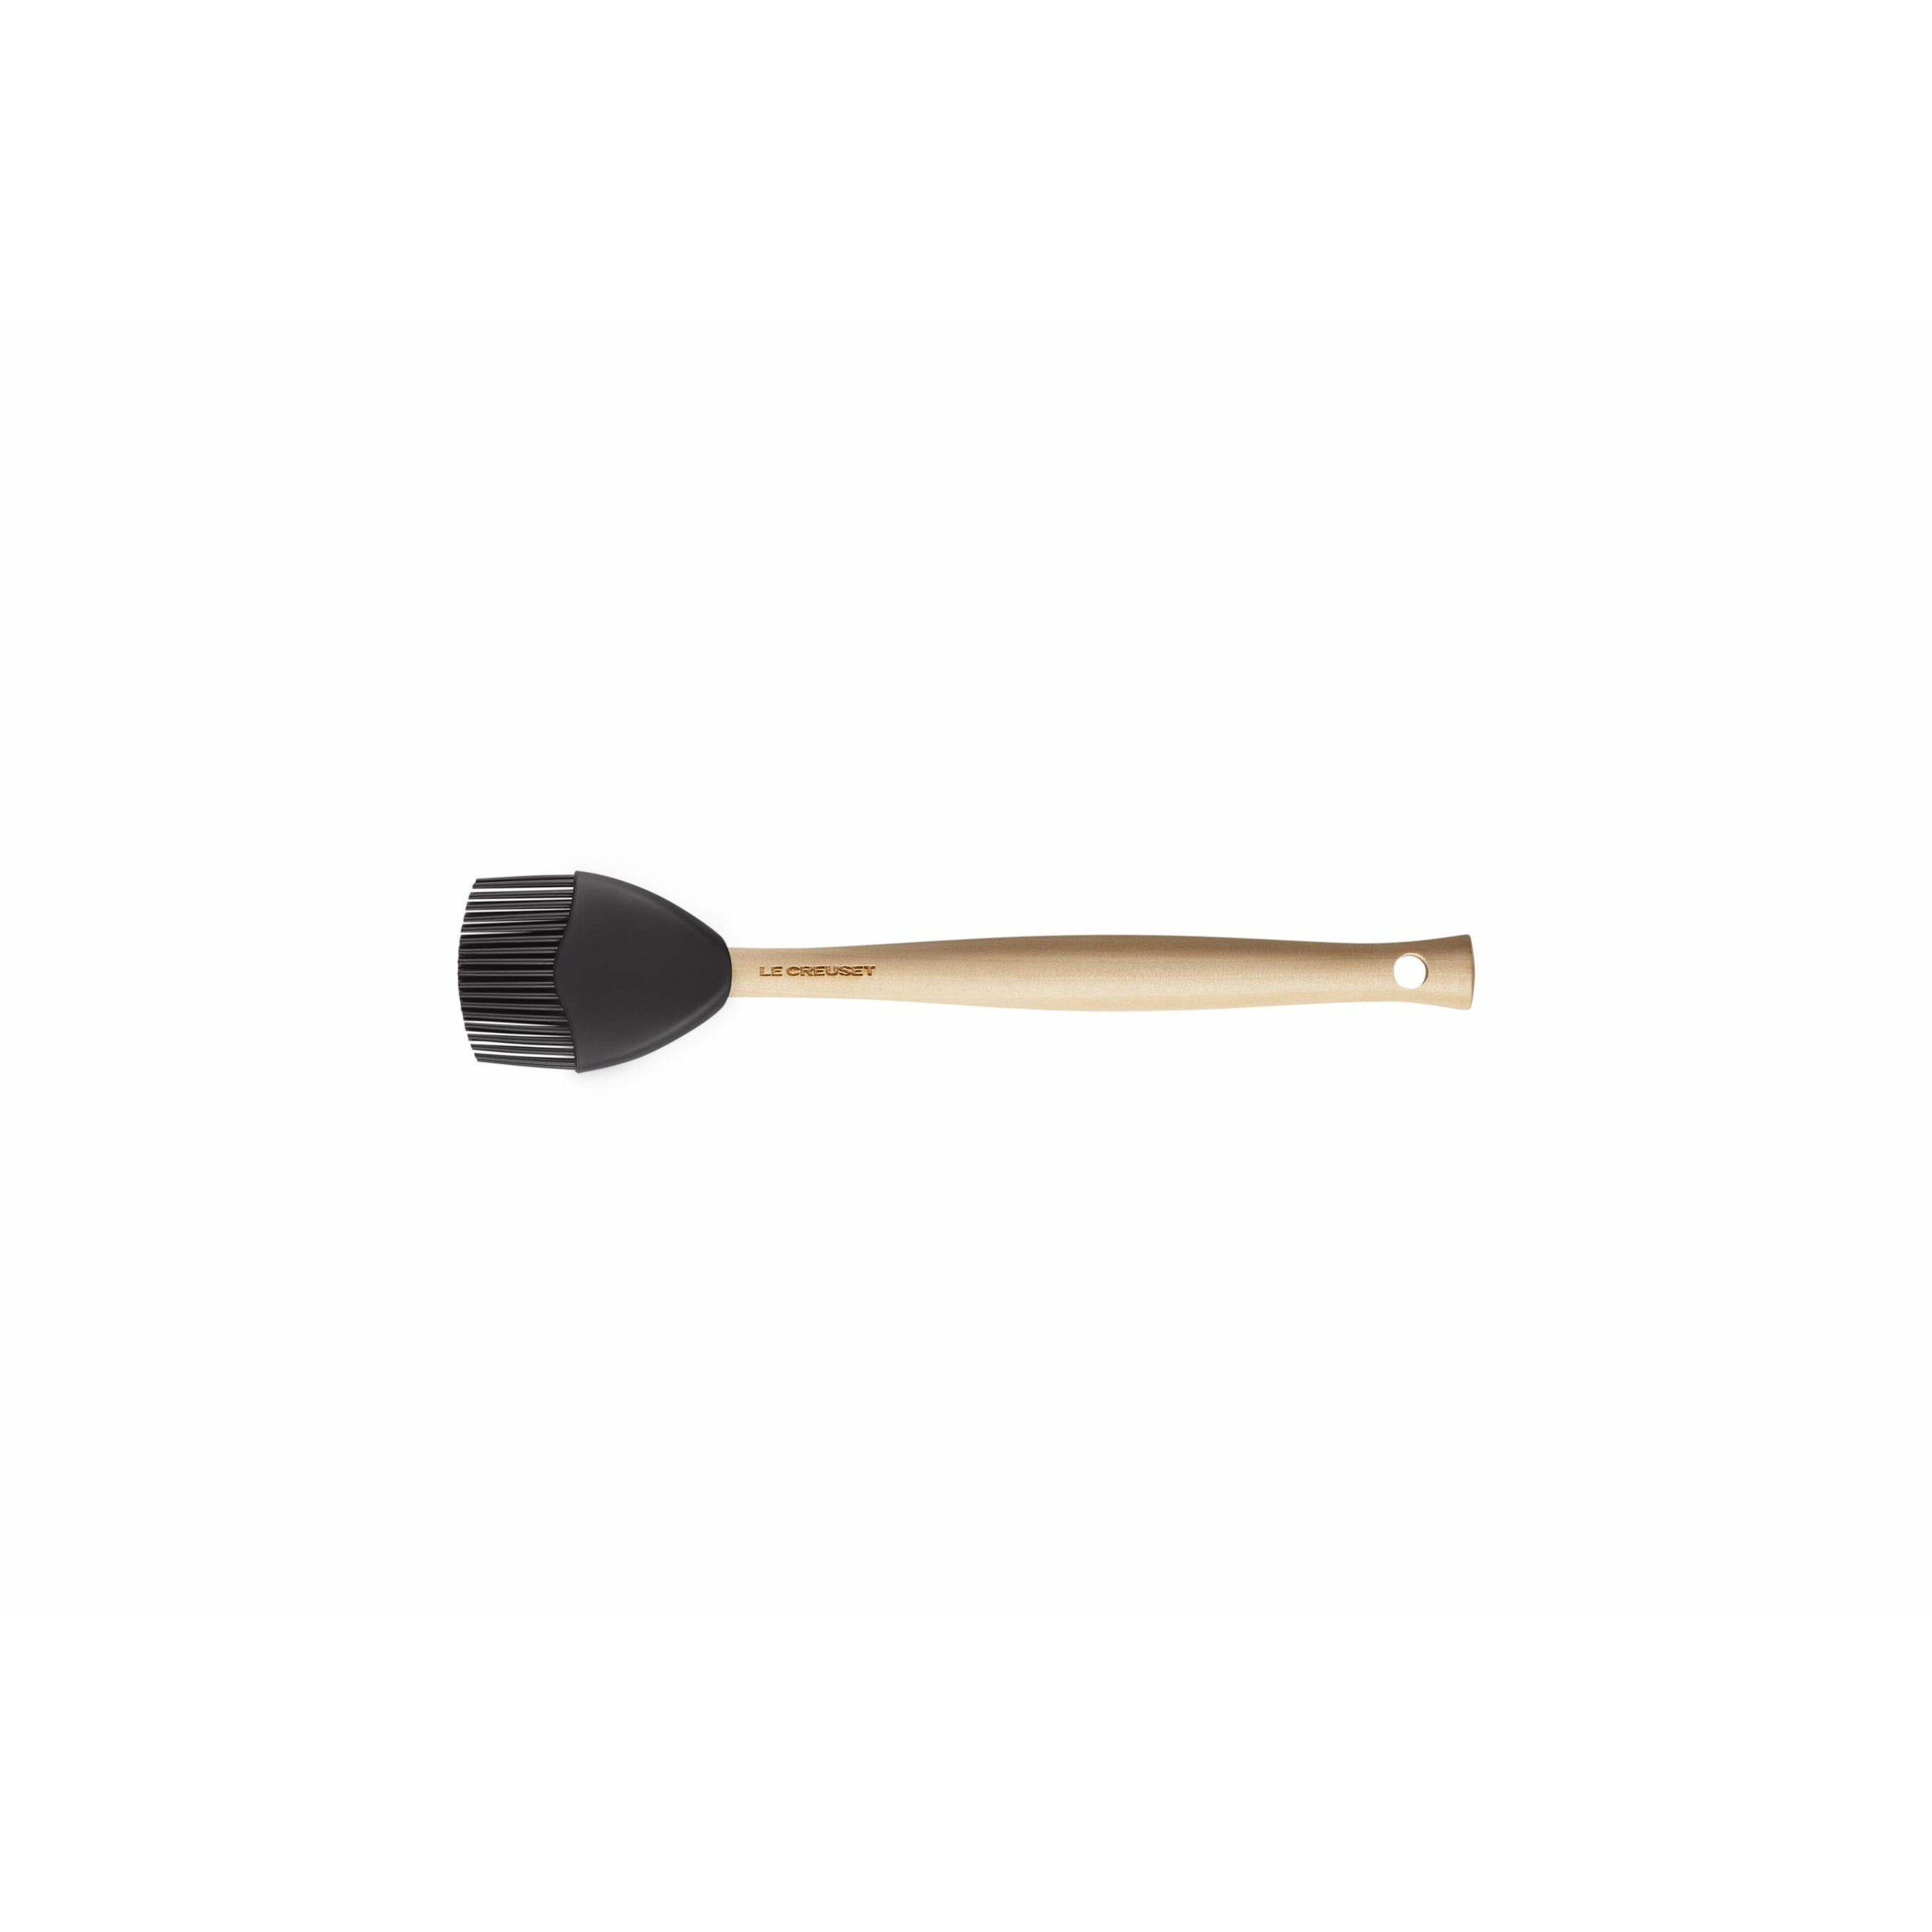 Le Creuset Craft Grill and Baking Brush, Black